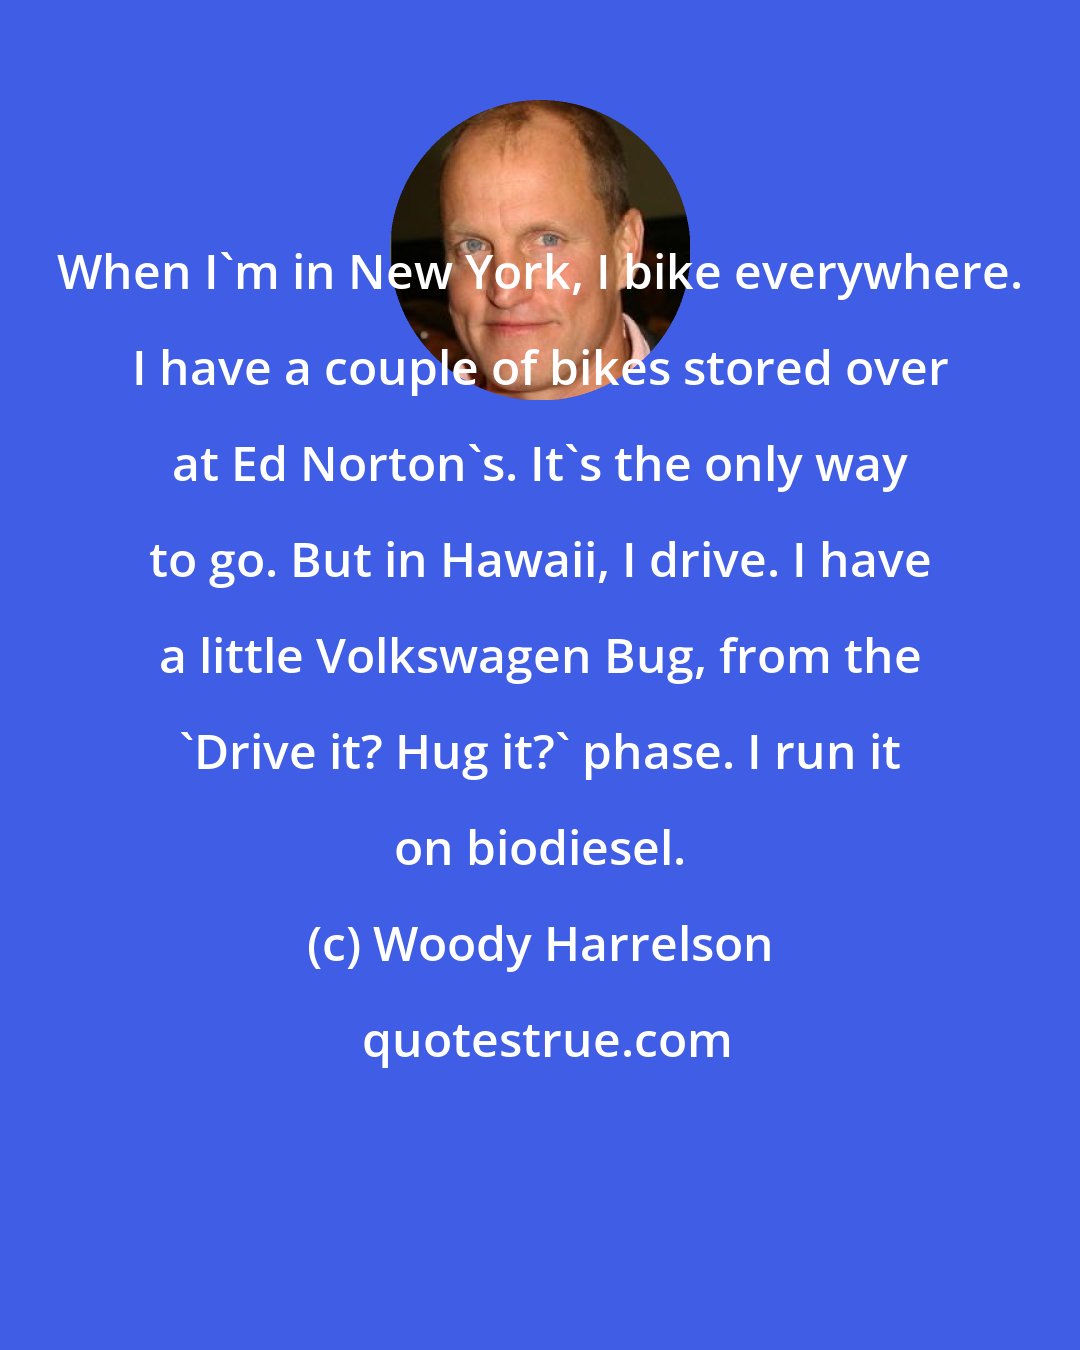 Woody Harrelson: When I'm in New York, I bike everywhere. I have a couple of bikes stored over at Ed Norton's. It's the only way to go. But in Hawaii, I drive. I have a little Volkswagen Bug, from the 'Drive it? Hug it?' phase. I run it on biodiesel.